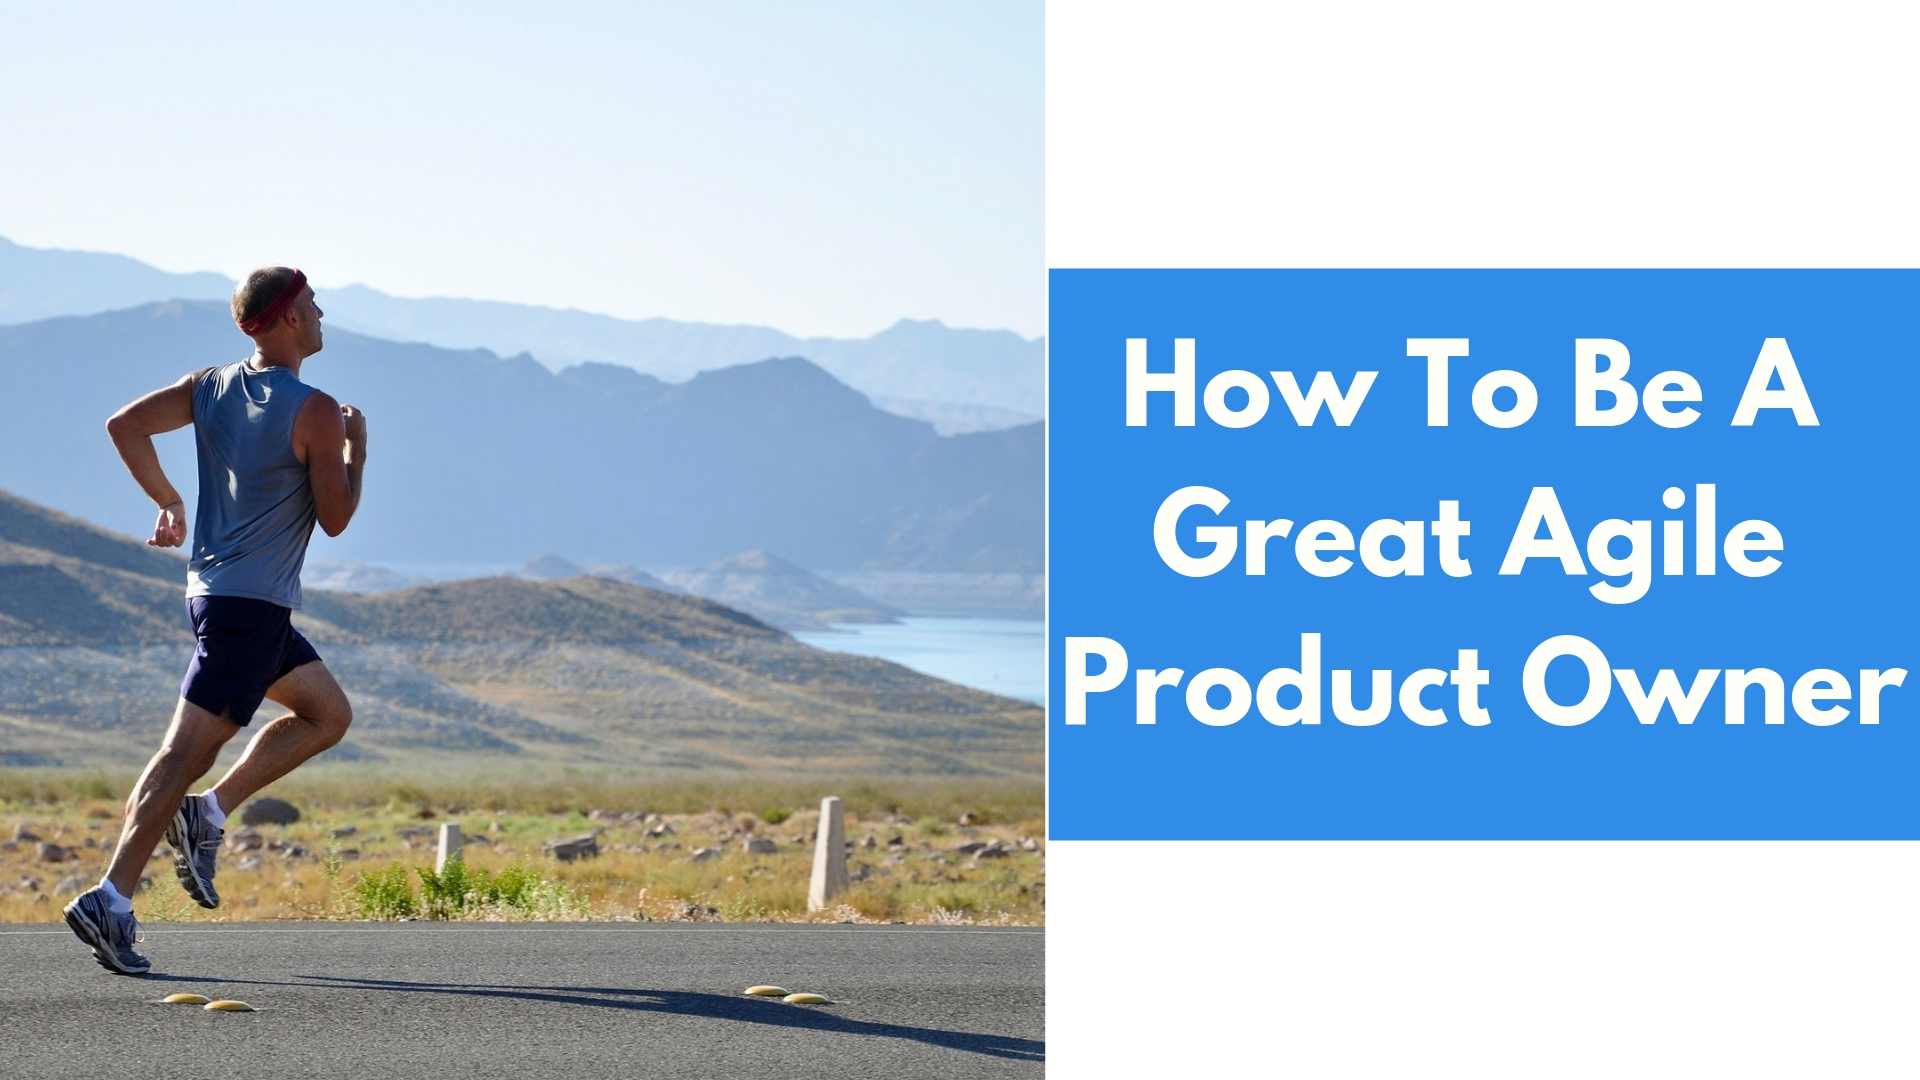 How To Be A Great Agile Product Owner